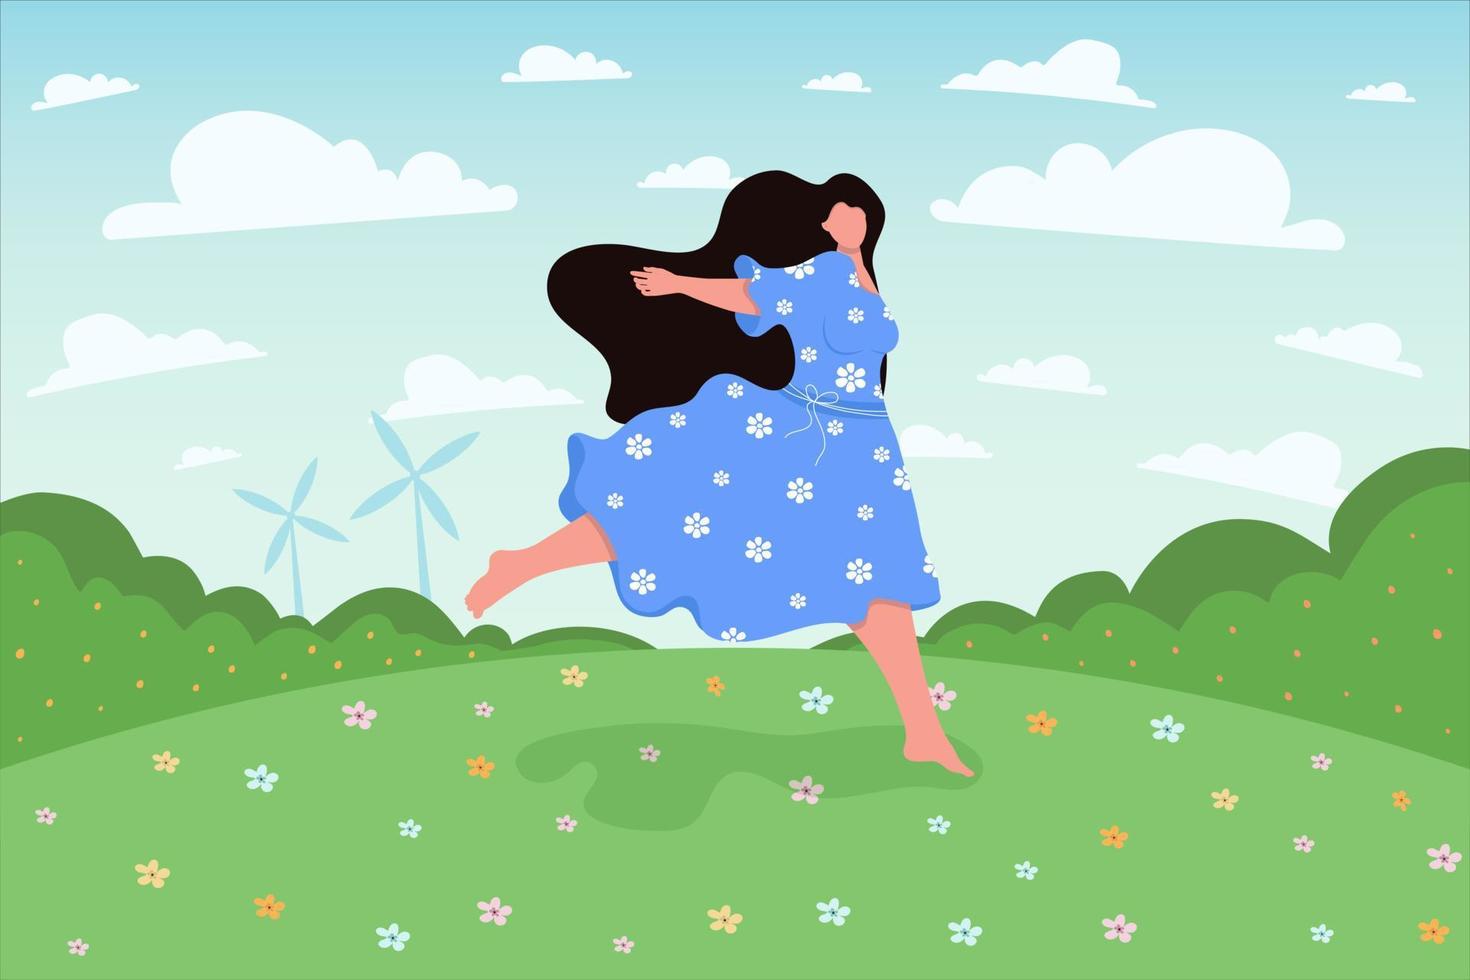 The girl runs across the field, nature, ecology vector